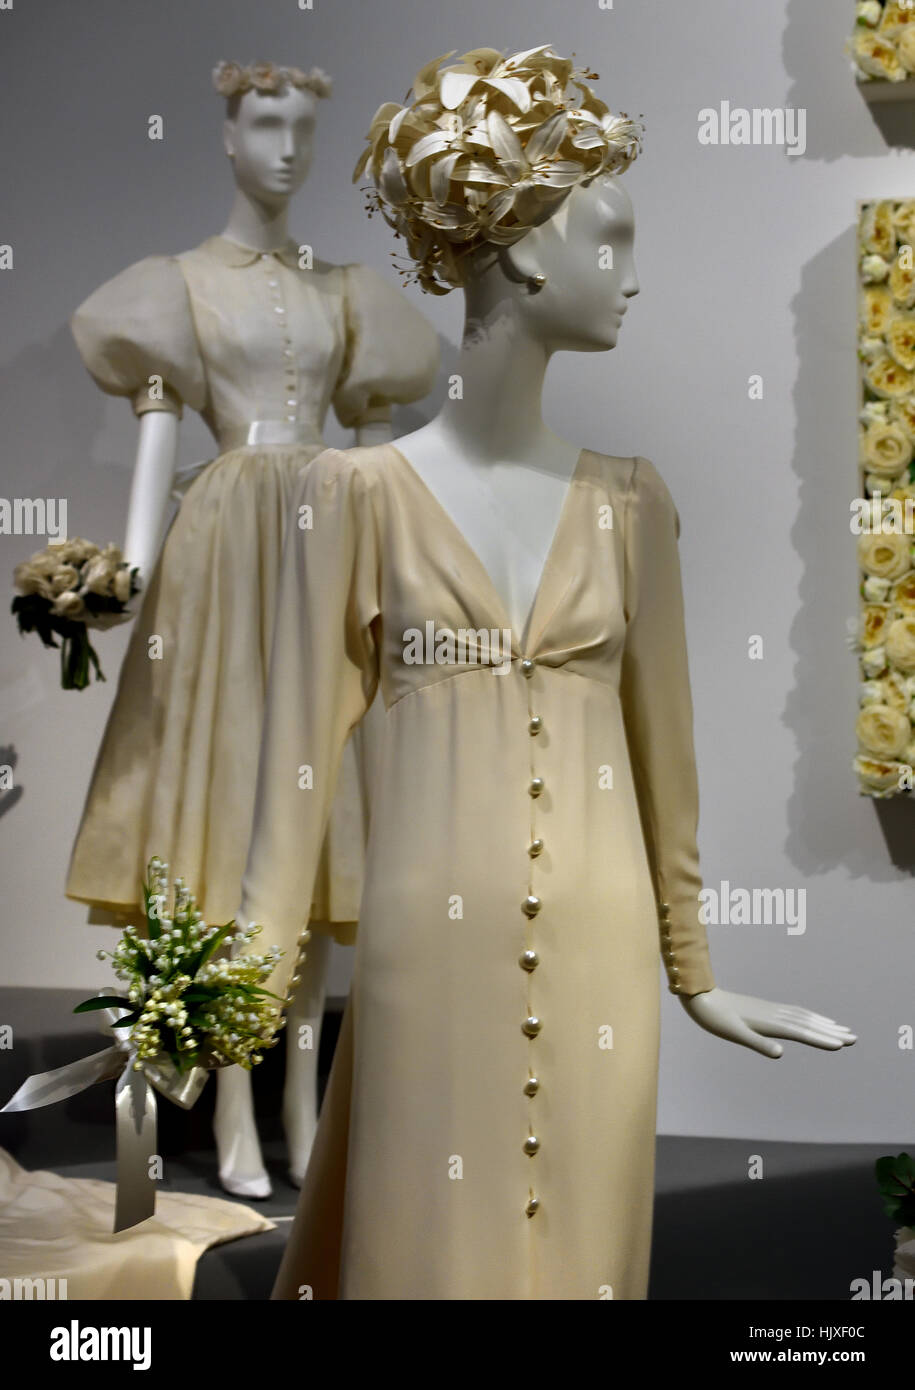 Breakfast at Tiffany's in the Hubert de Givenchy exhibition - The